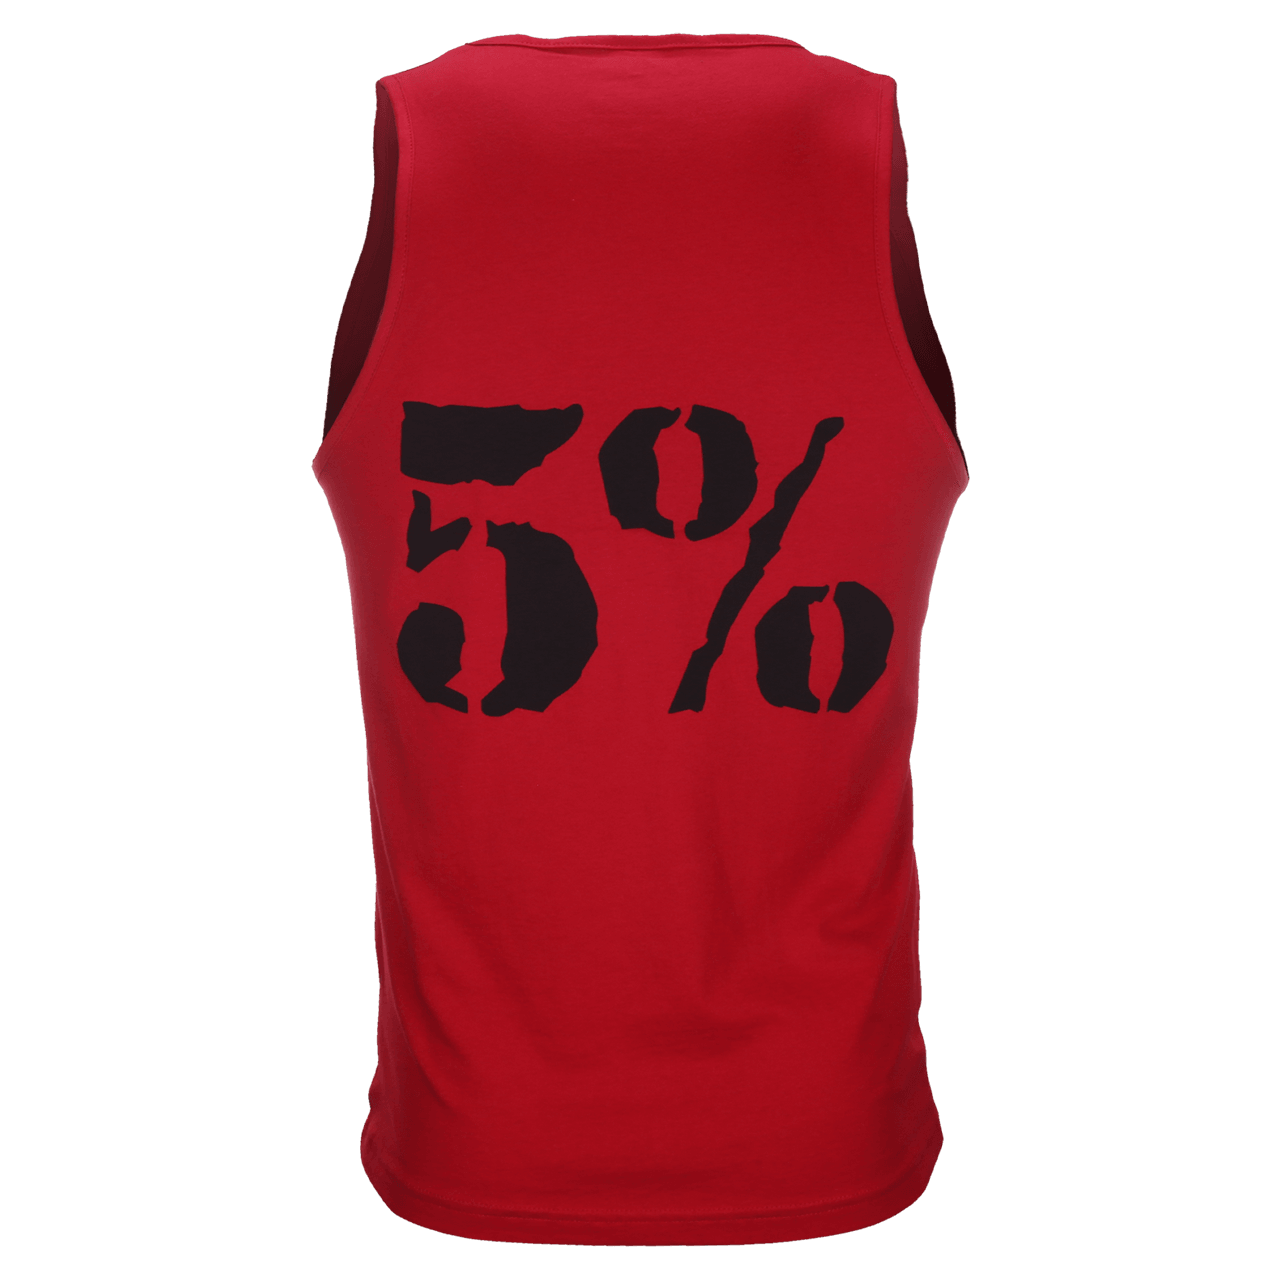 Reps for Rich, Tank Top (3 Colors) - 5% Nutrition